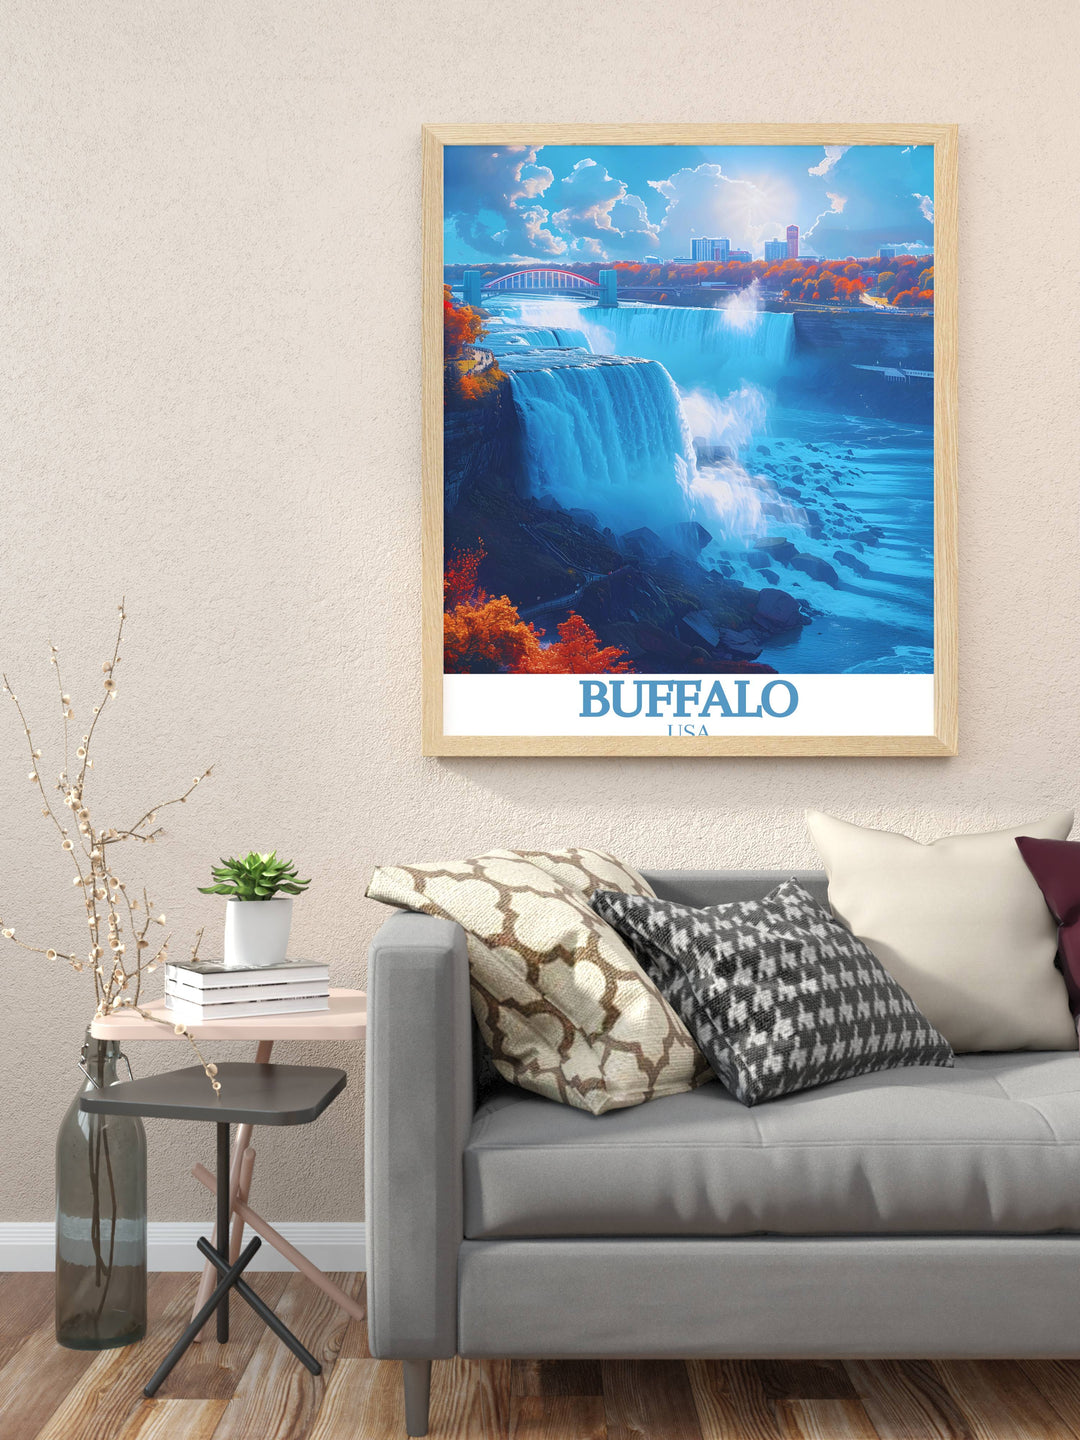 Personalized Buffalo poster print featuring Niangara Falls offering a unique and thoughtful gift for any occasion perfect for Buffalo lovers who appreciate high quality artwork and custom designs